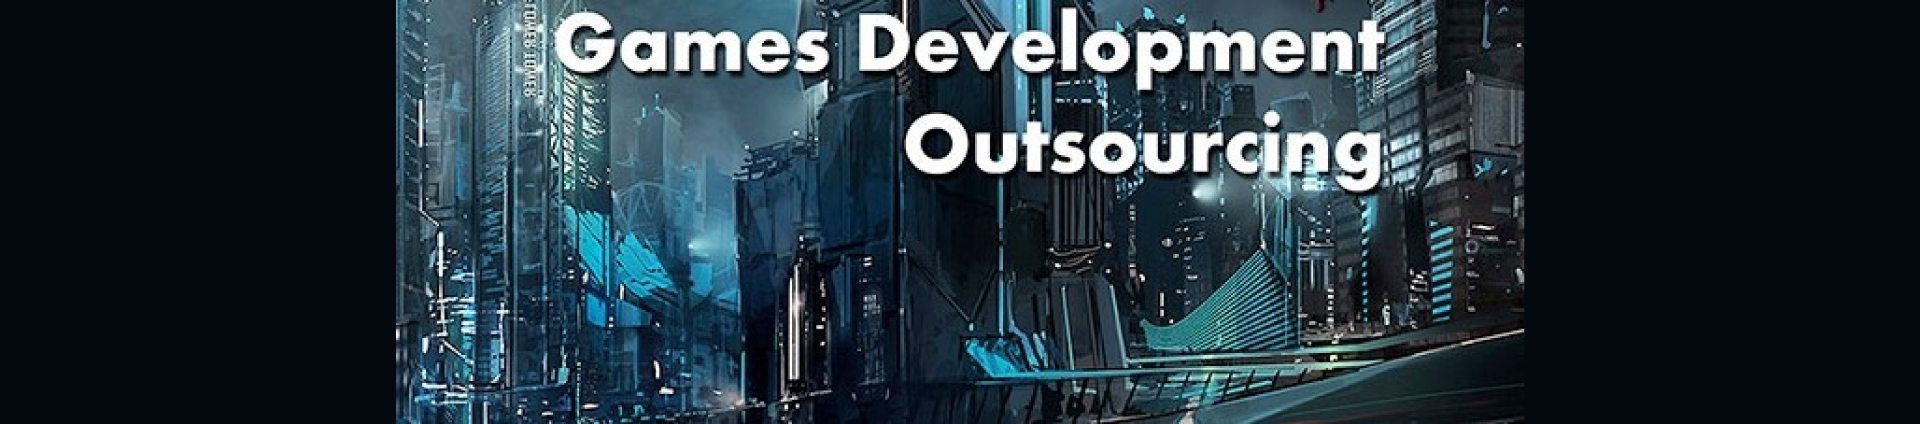 Game Development Outsourcing